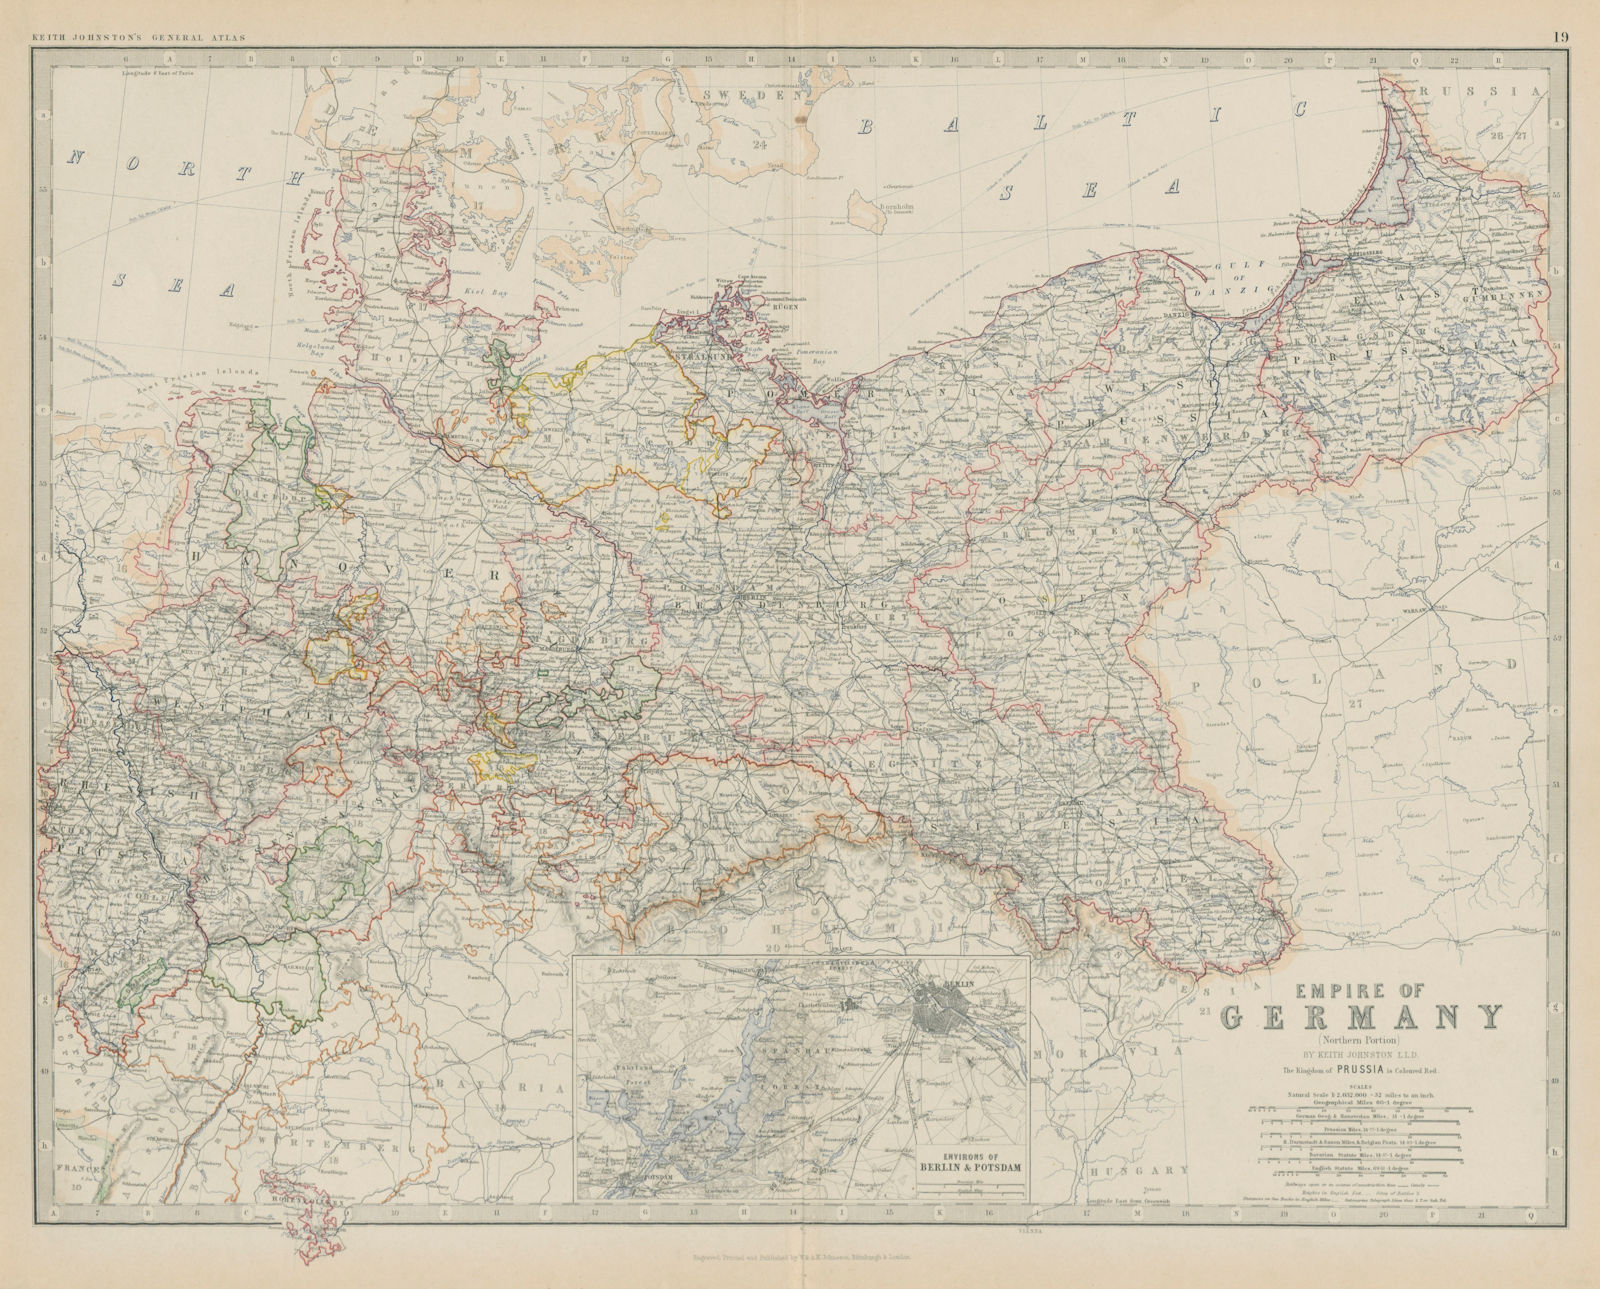 Empire of Germany (North). Berlin environs. Prussia. 50x60cm. JOHNSTON 1879 map